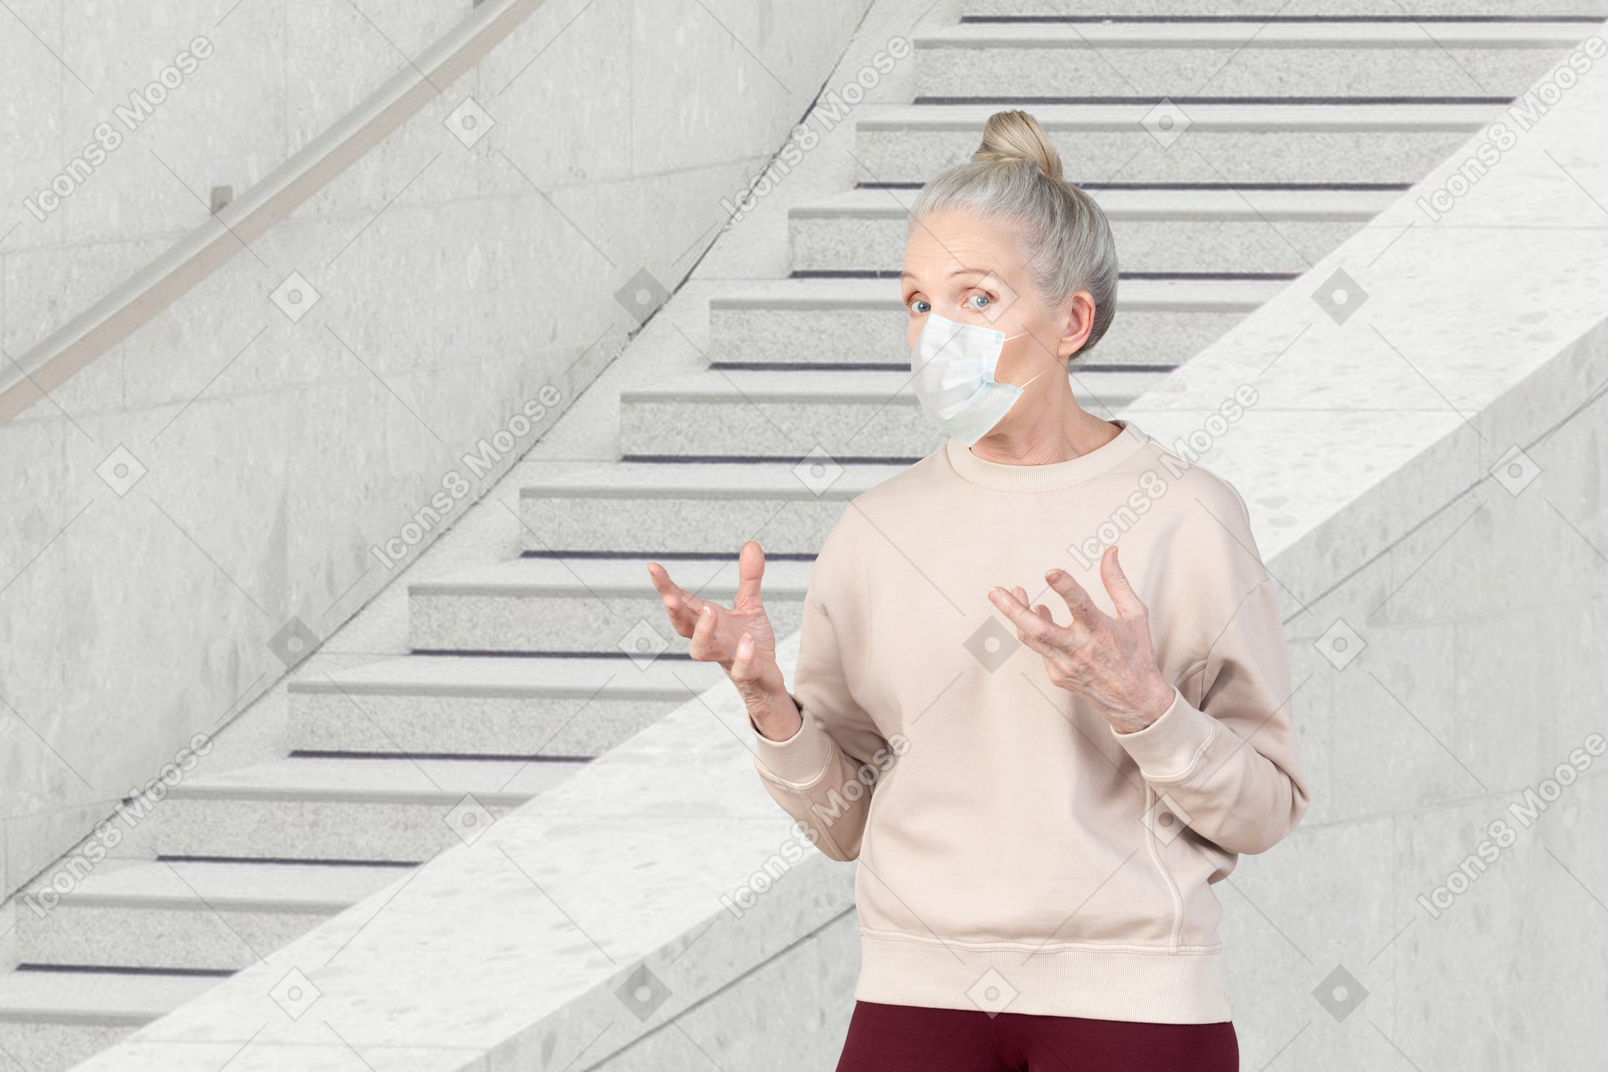 A woman wearing a face mask standing in front of a staircase